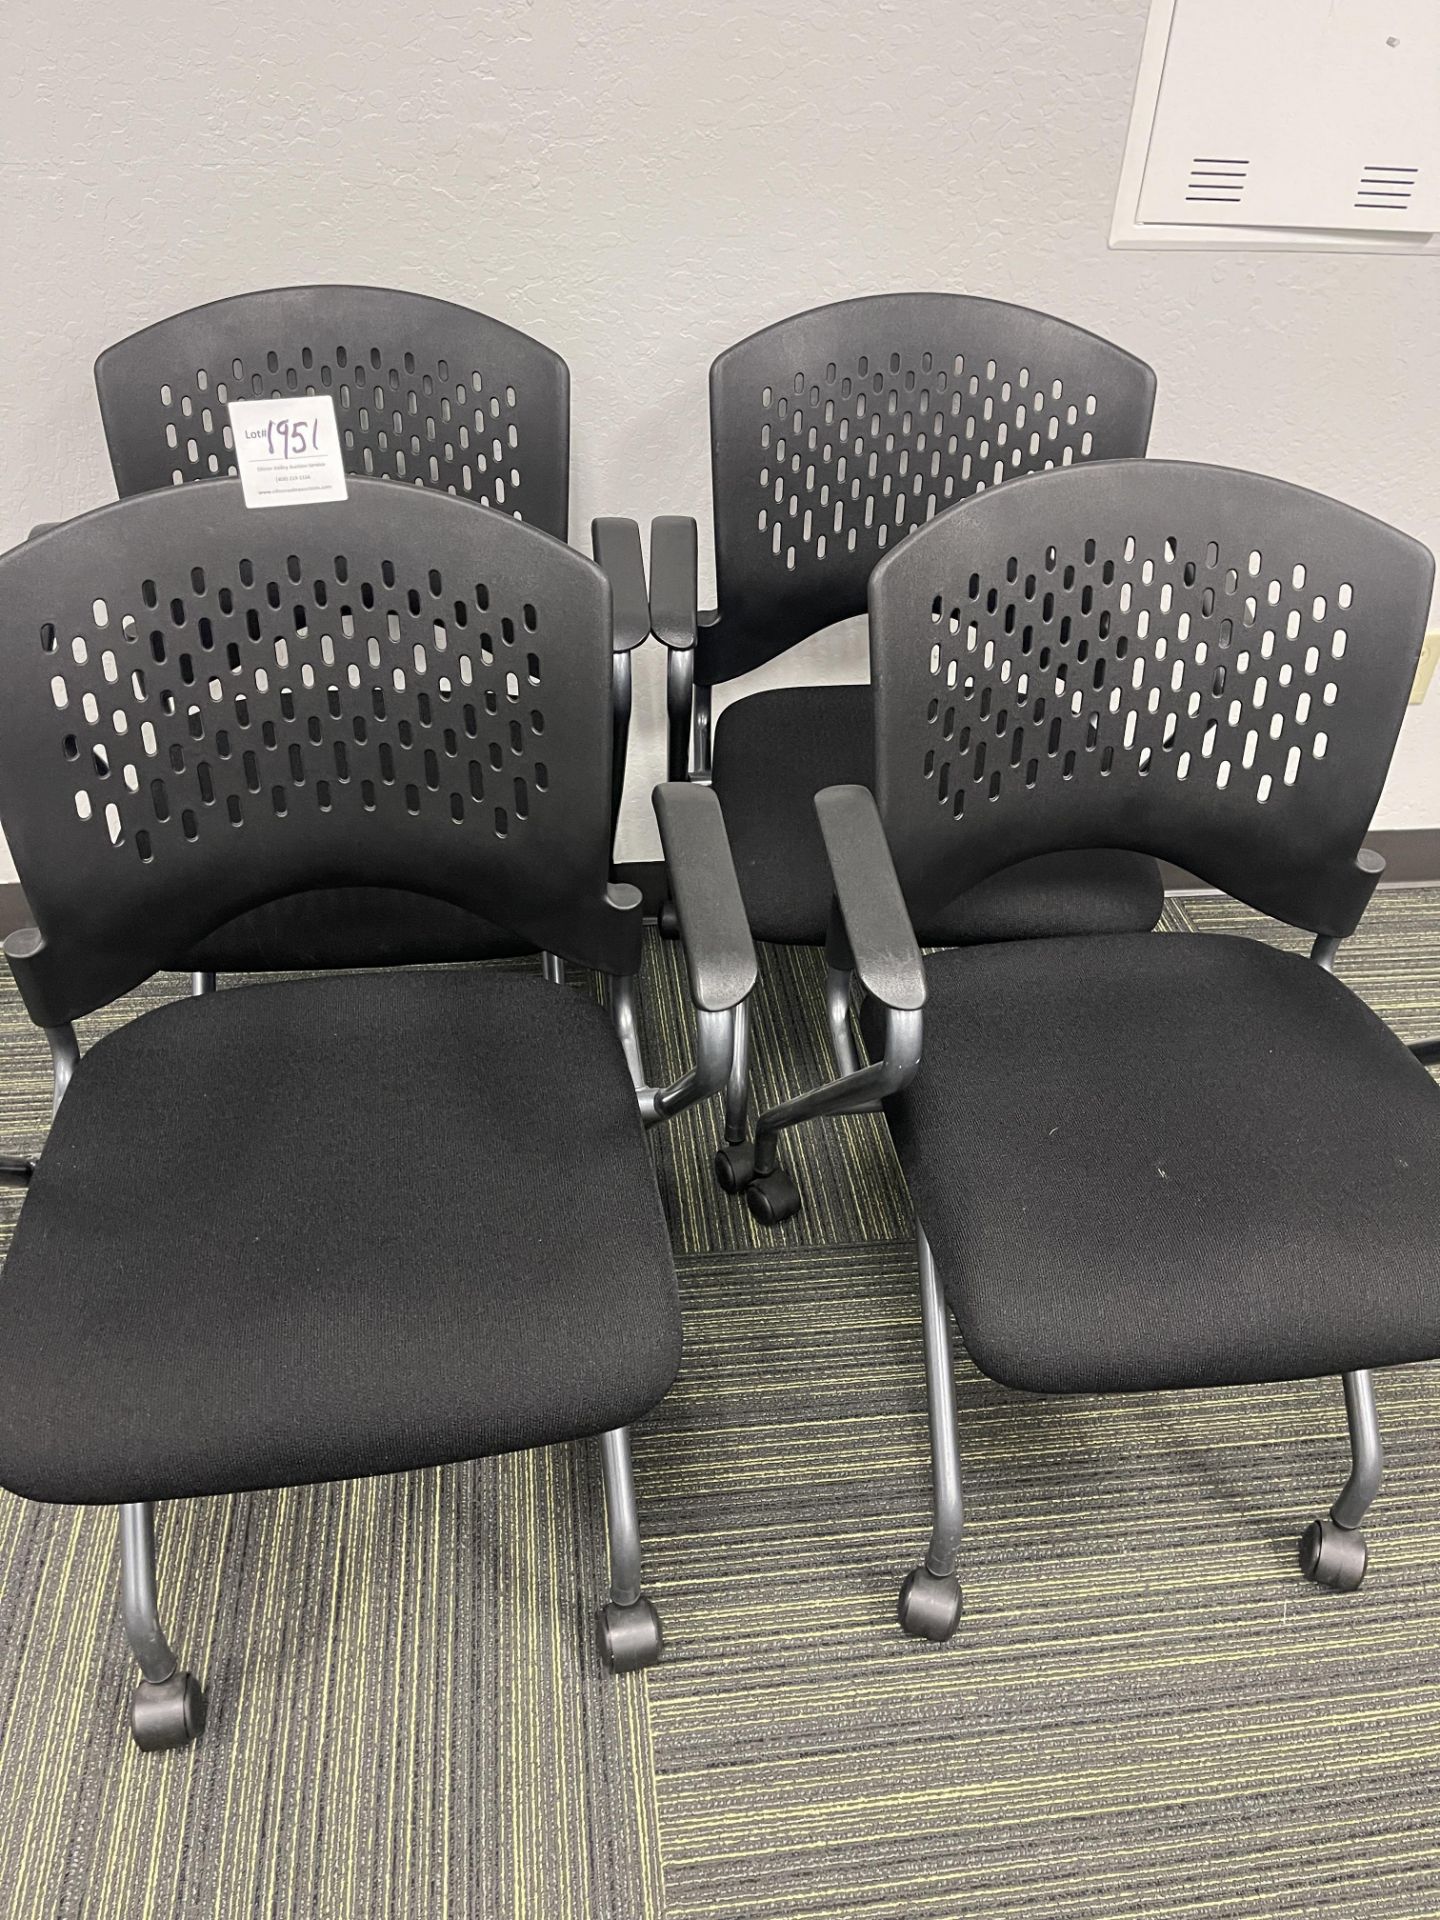 Four Black Desk Chairs with arms